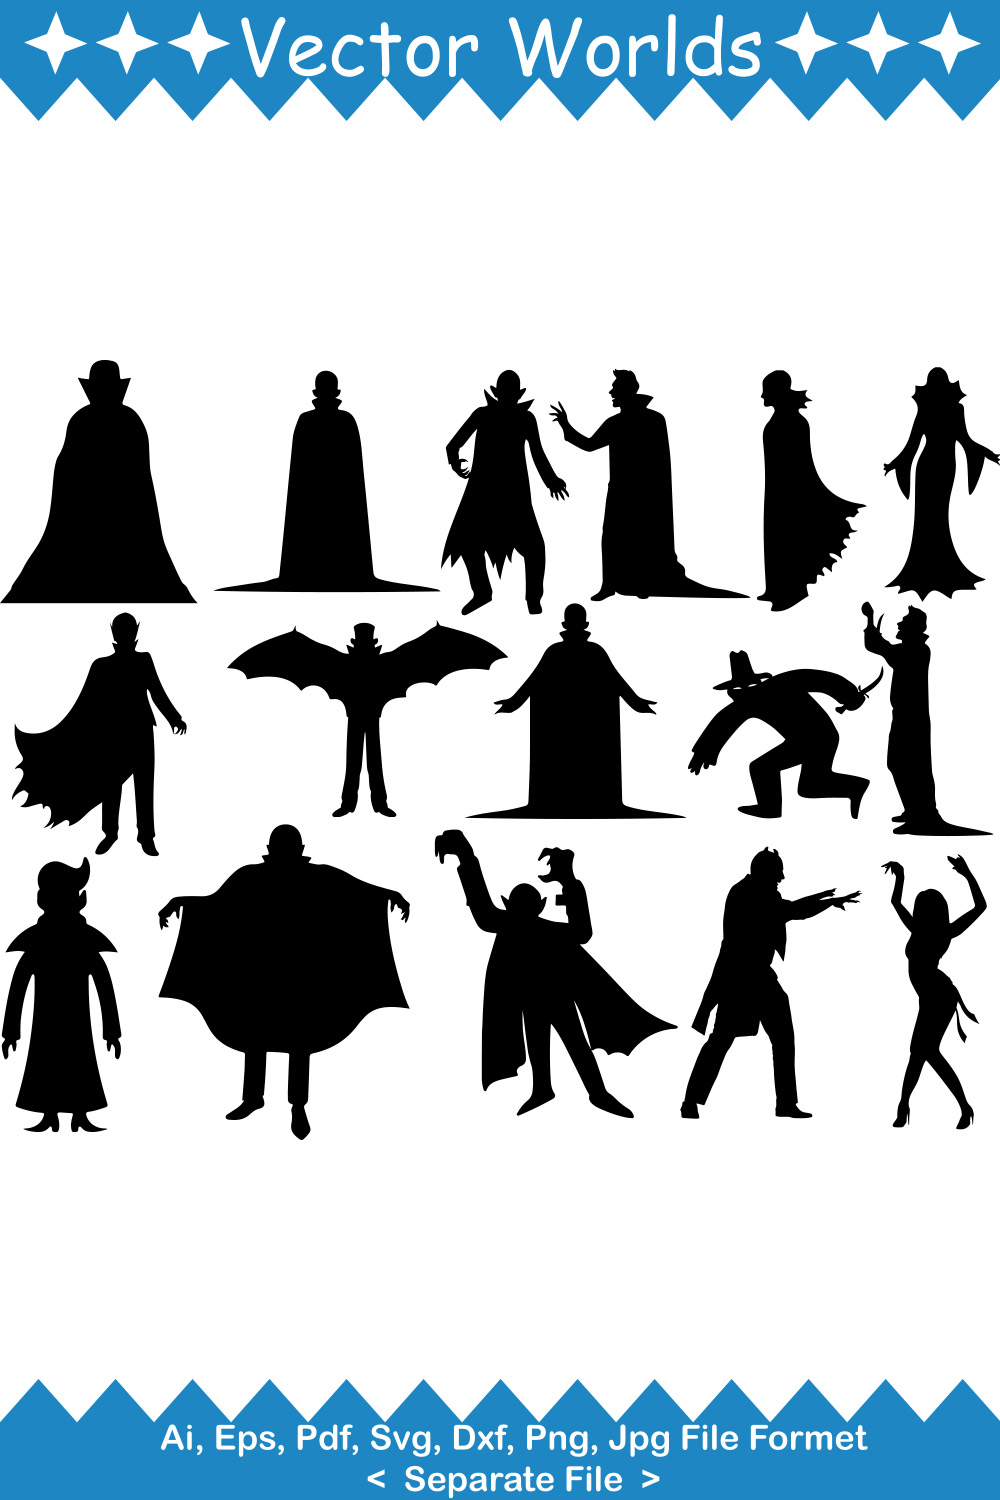 A selection of charming images of dracula silhouettes